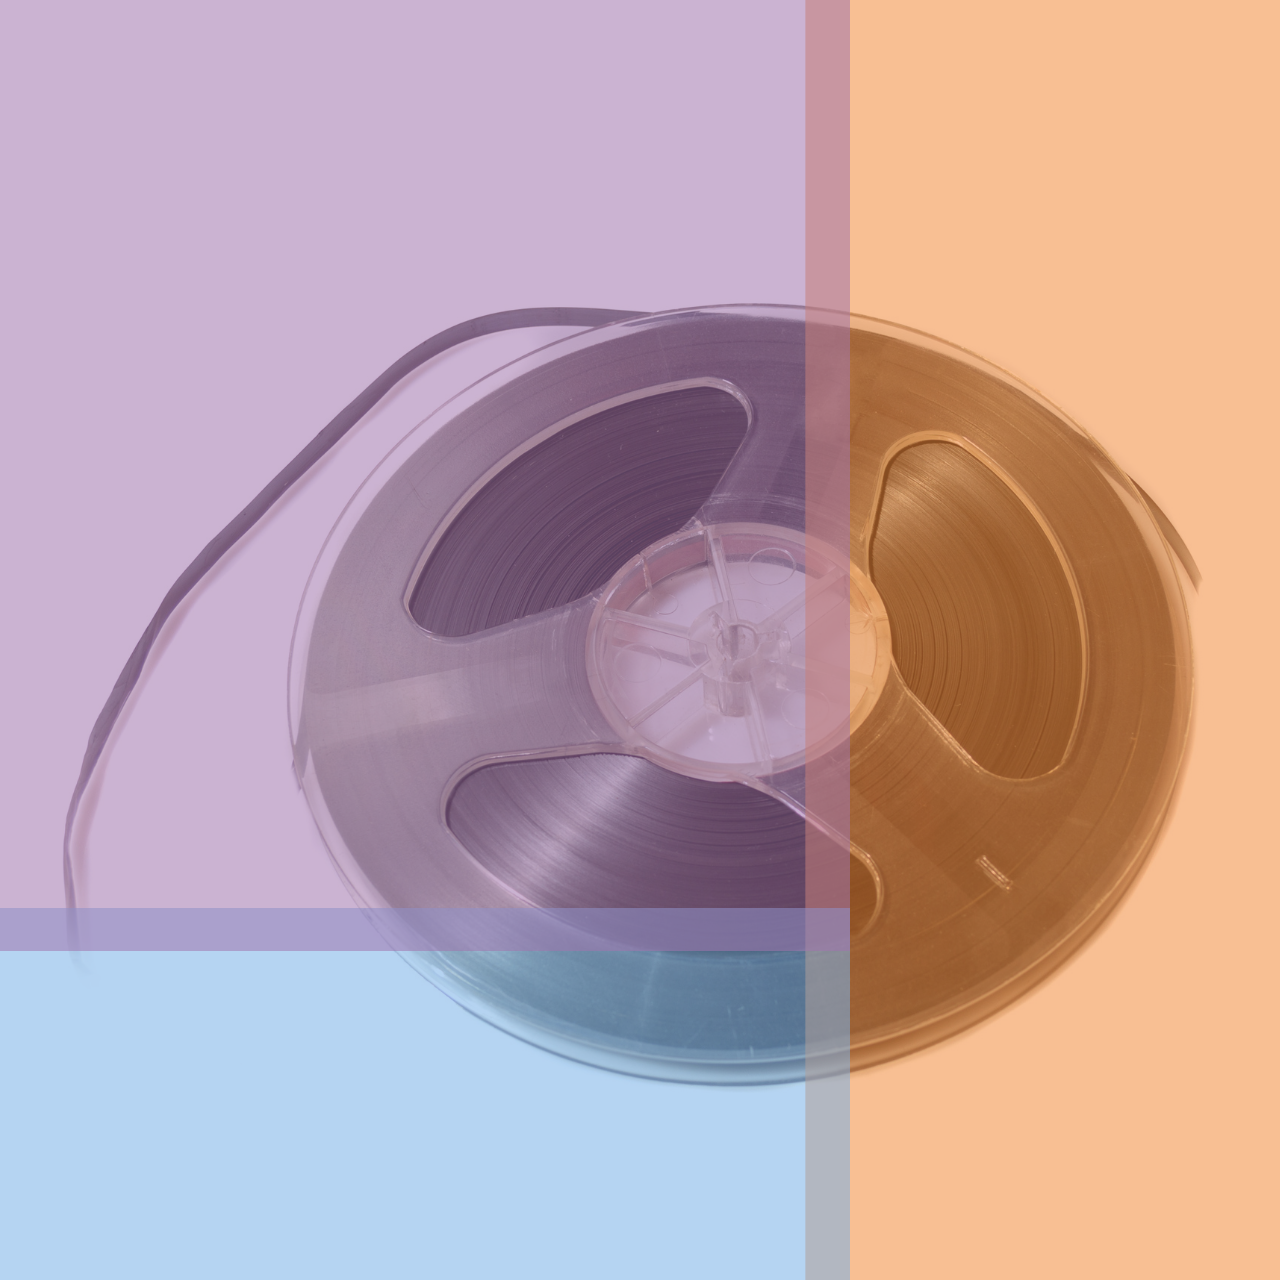 A recording reel, overlaid with the library colors